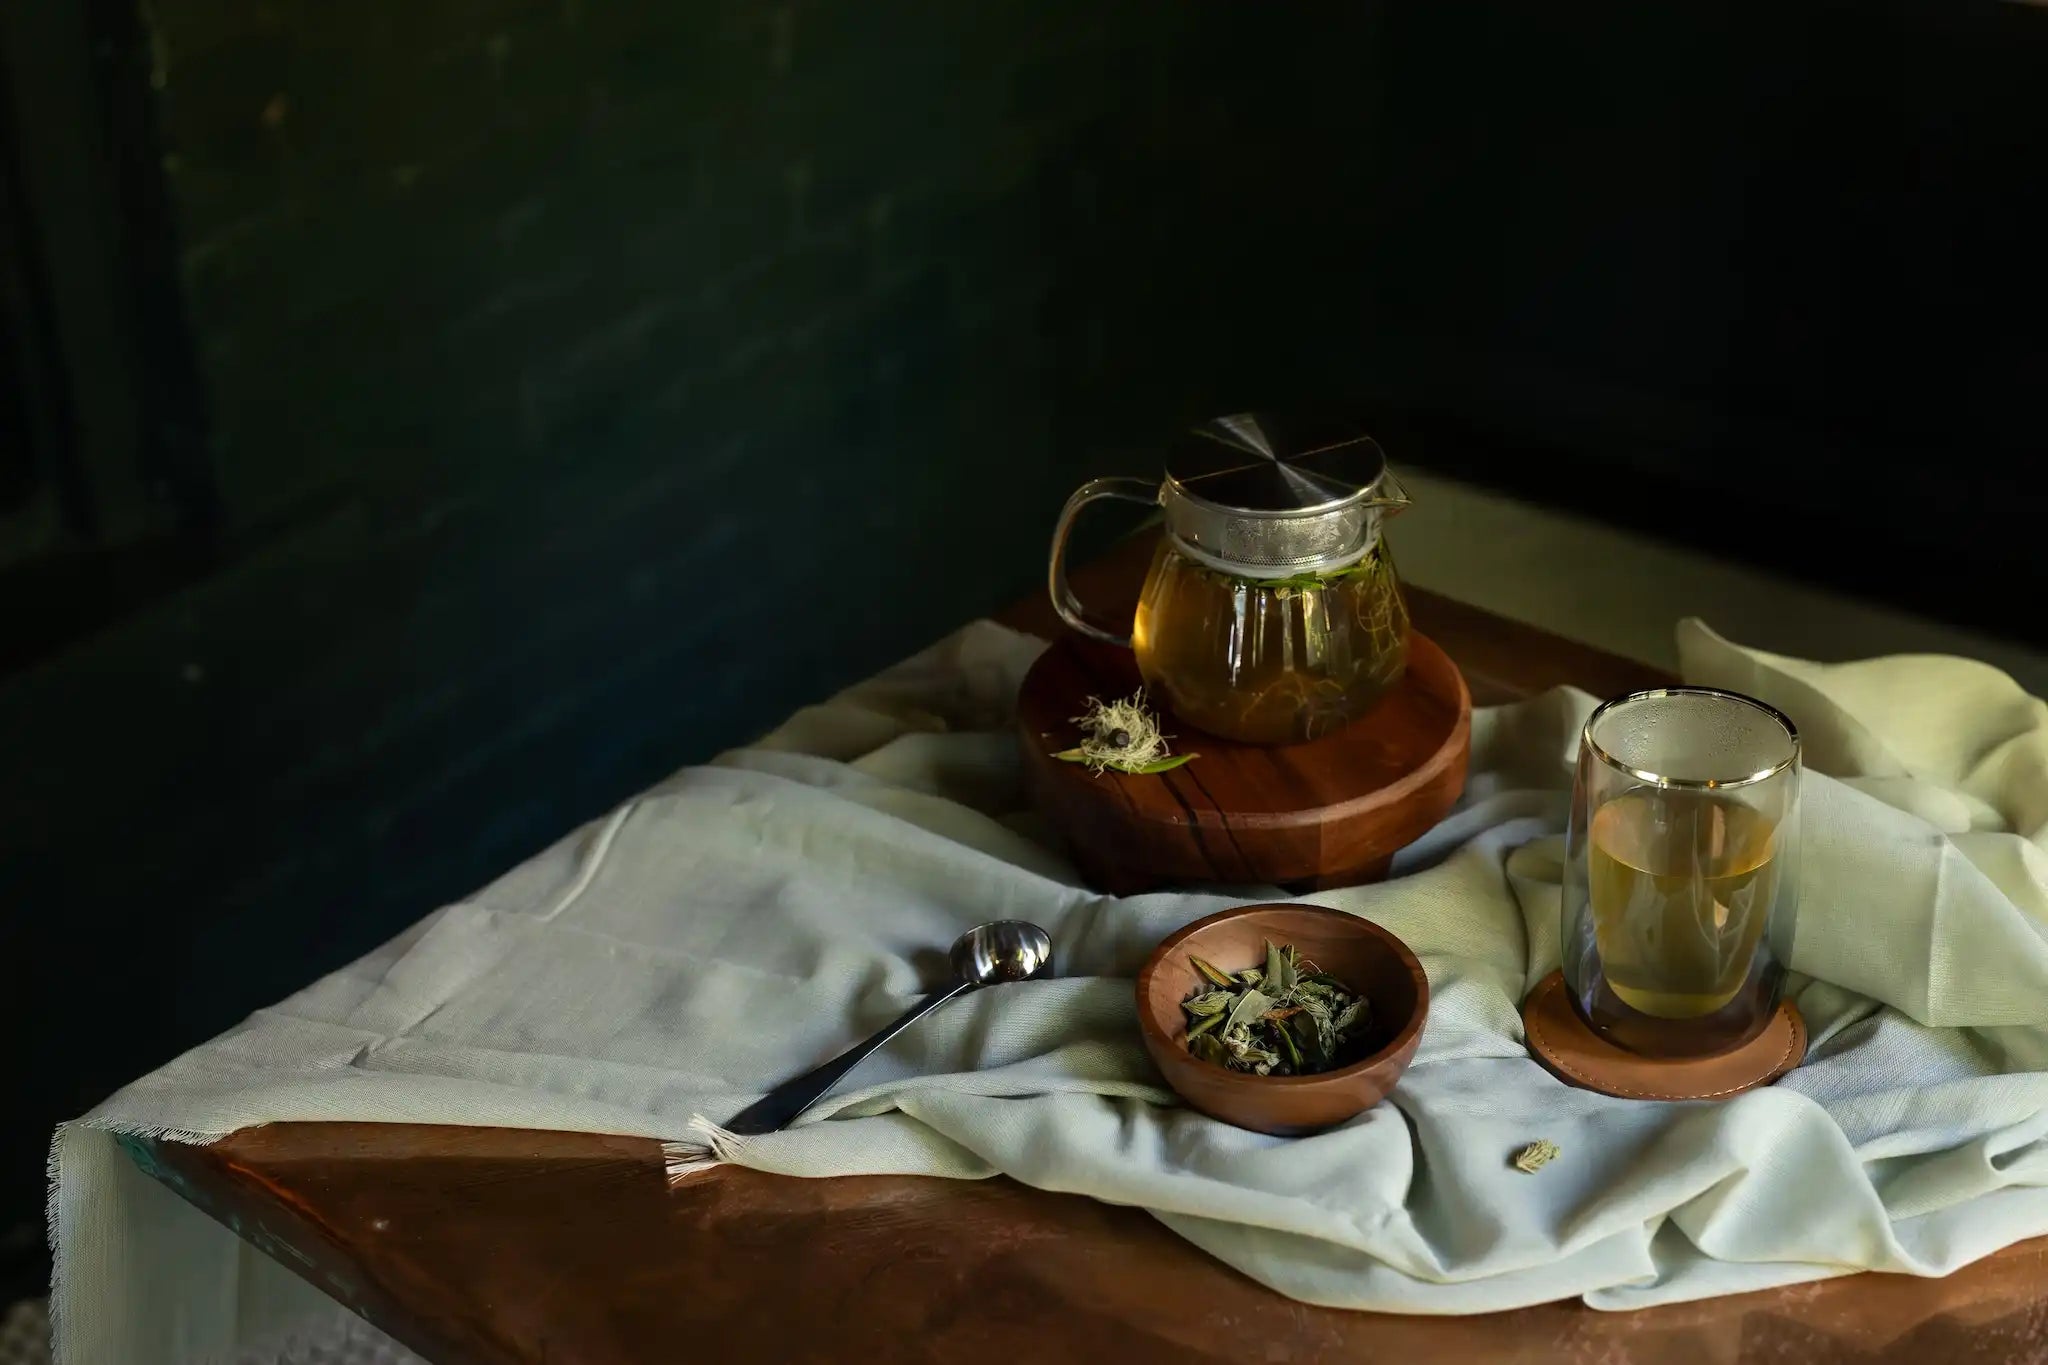 wild taiga herbal tisane in a glass teapot and glass cup against a moody dark background with loose herbs